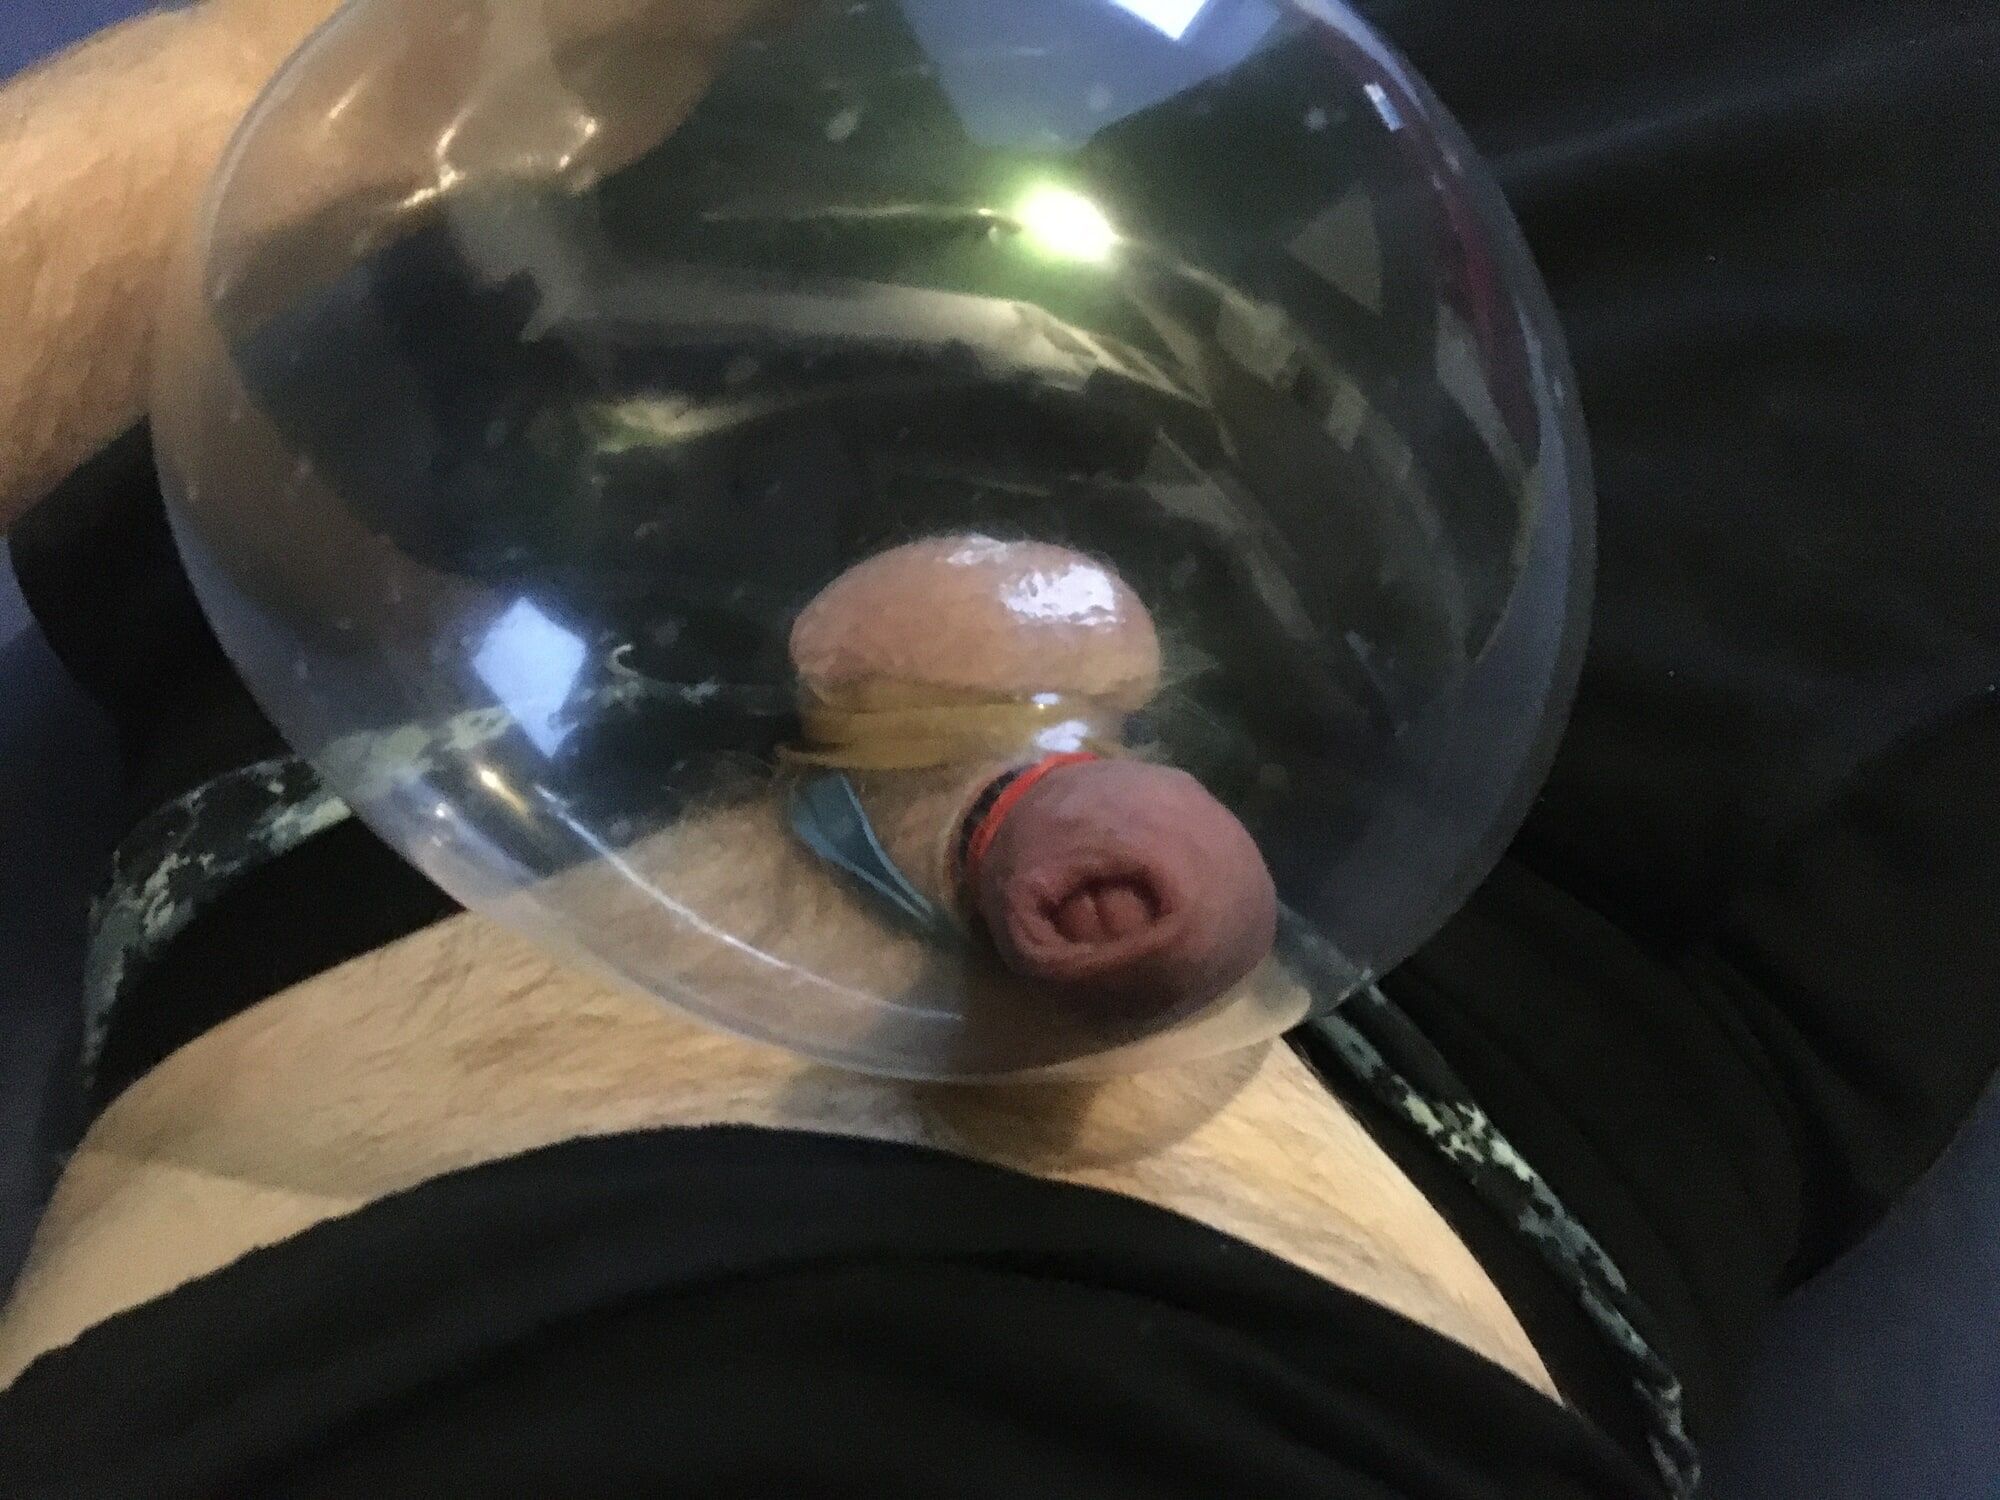  Haired Dick And Balls With Rubber Bands Condom Ballon  fuck #14